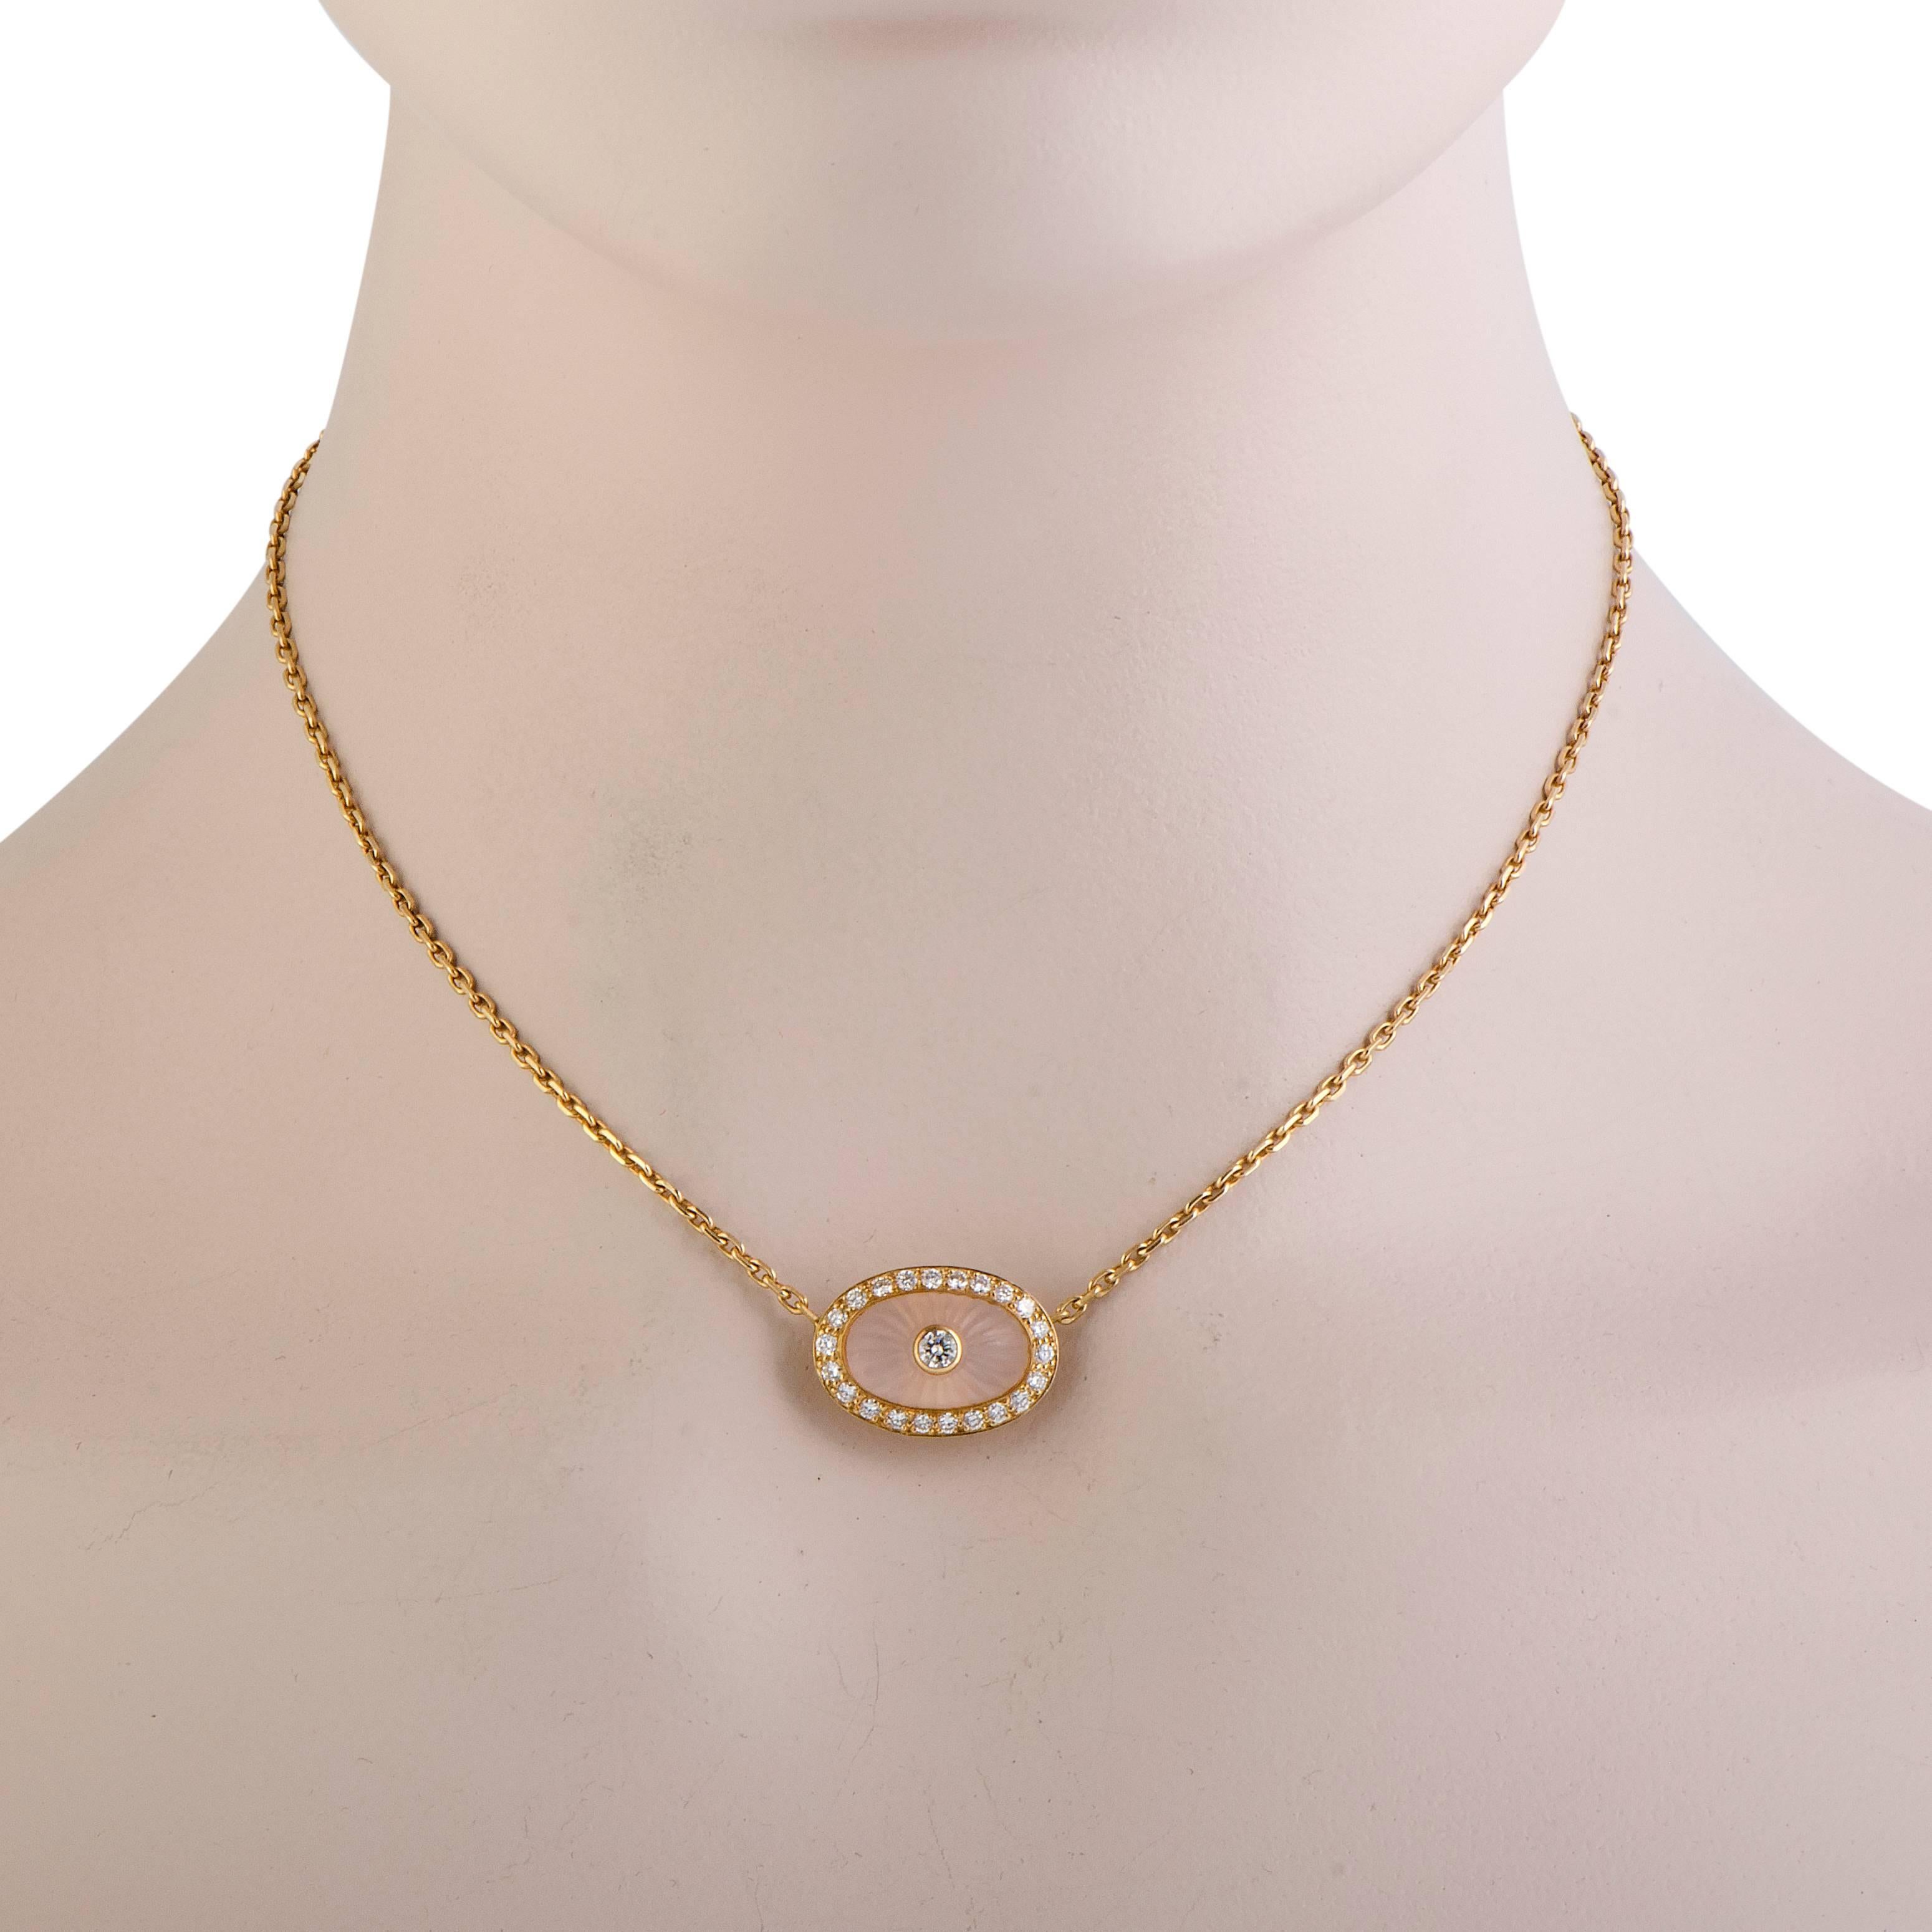 Magnificently graceful and elegant, this charming Boucheron design features an exceptionally alluring, feminine appeal. The necklace is made of 18K yellow gold and the pendant boasts a sublime pink crystal and 0.55 carats of diamonds.
Pendant